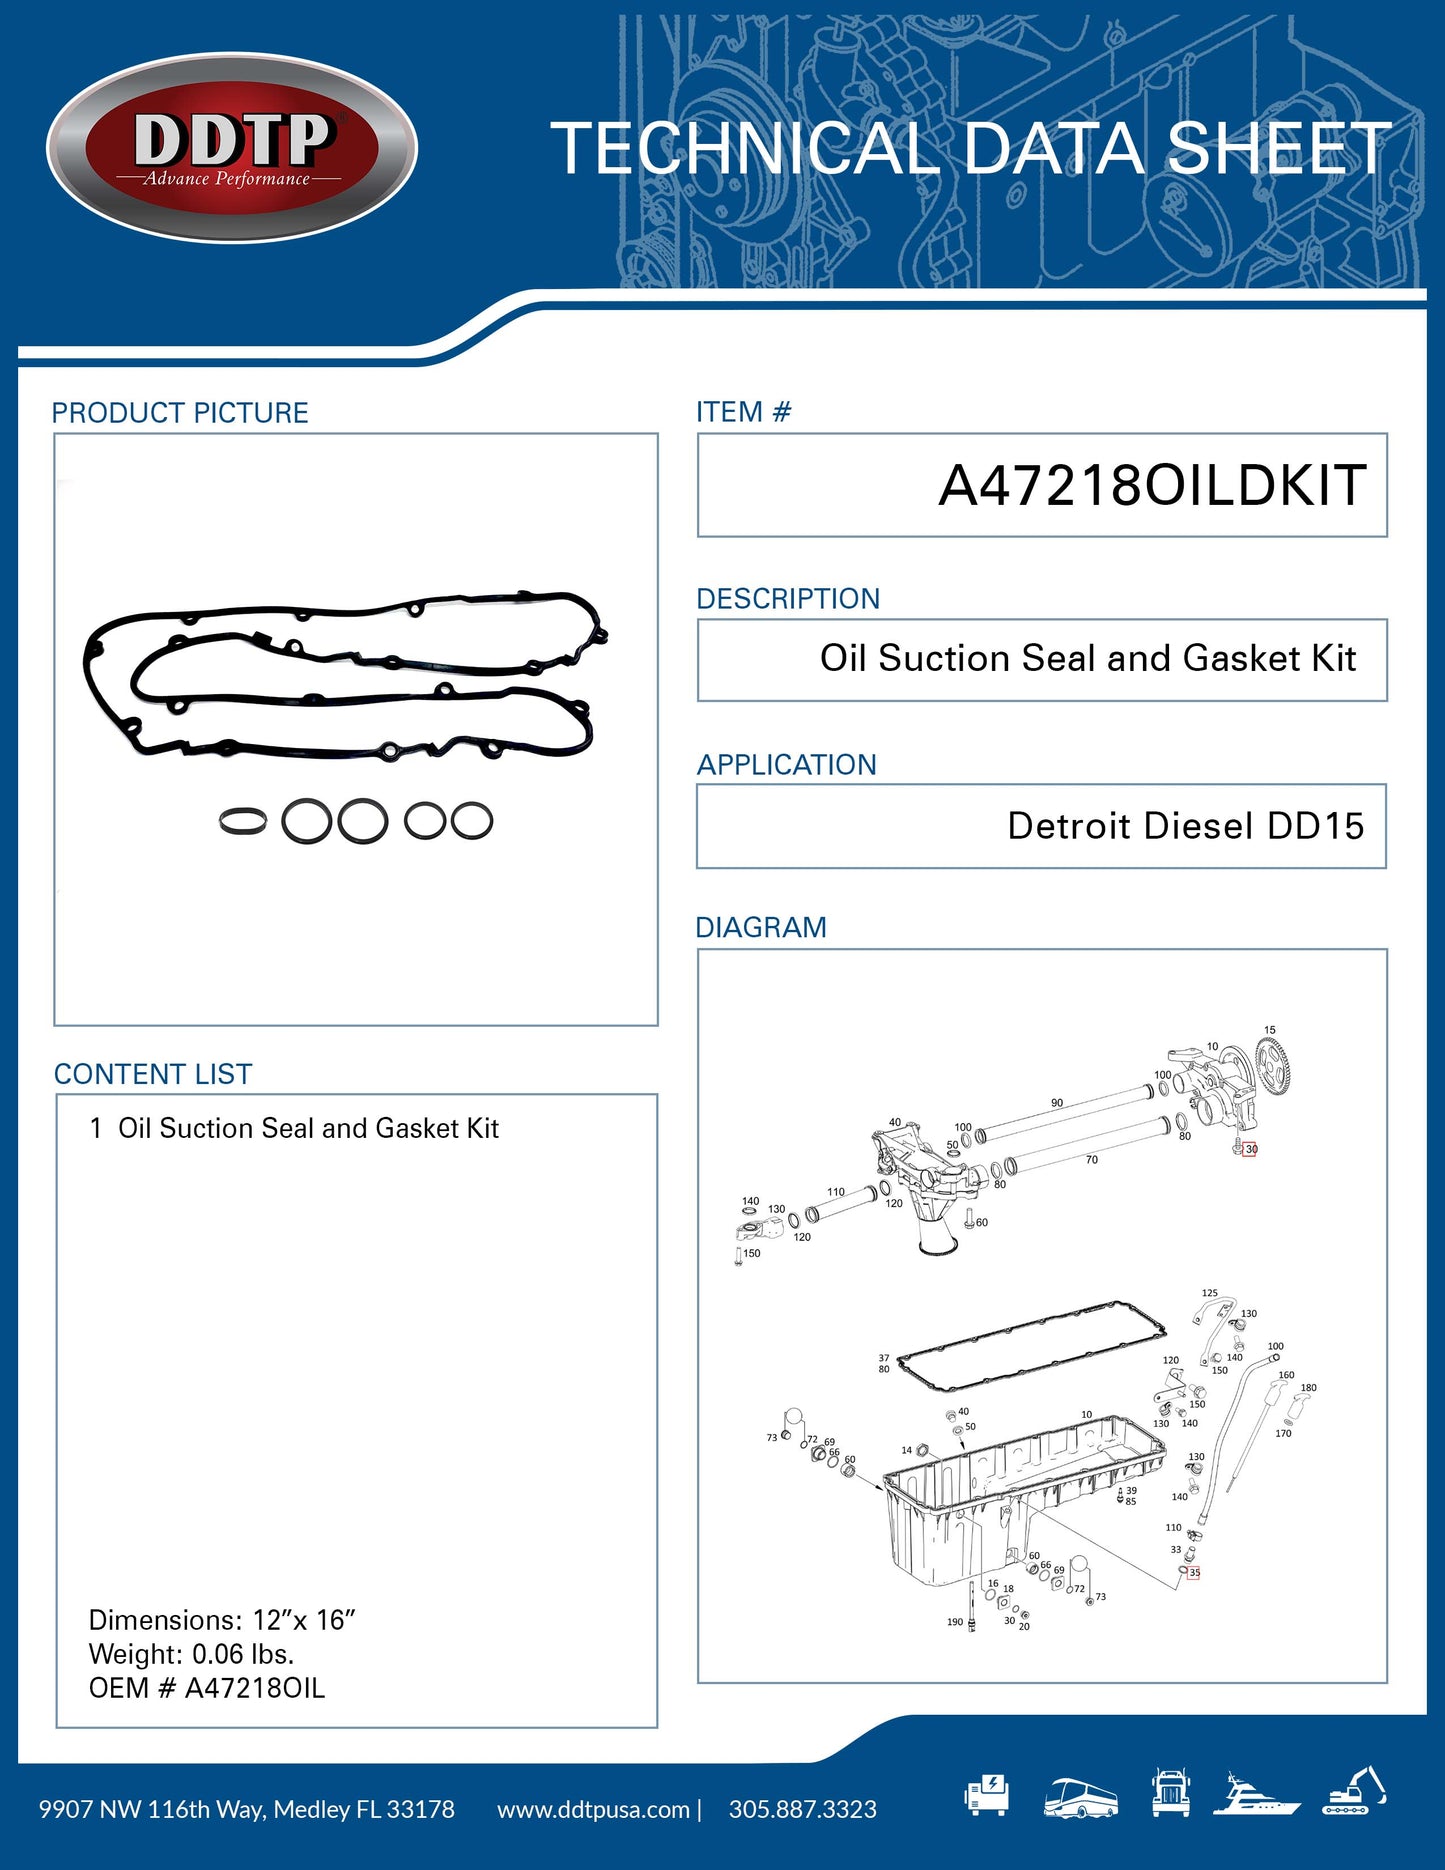 Oil Suction Seal and Gasket Kit DD15